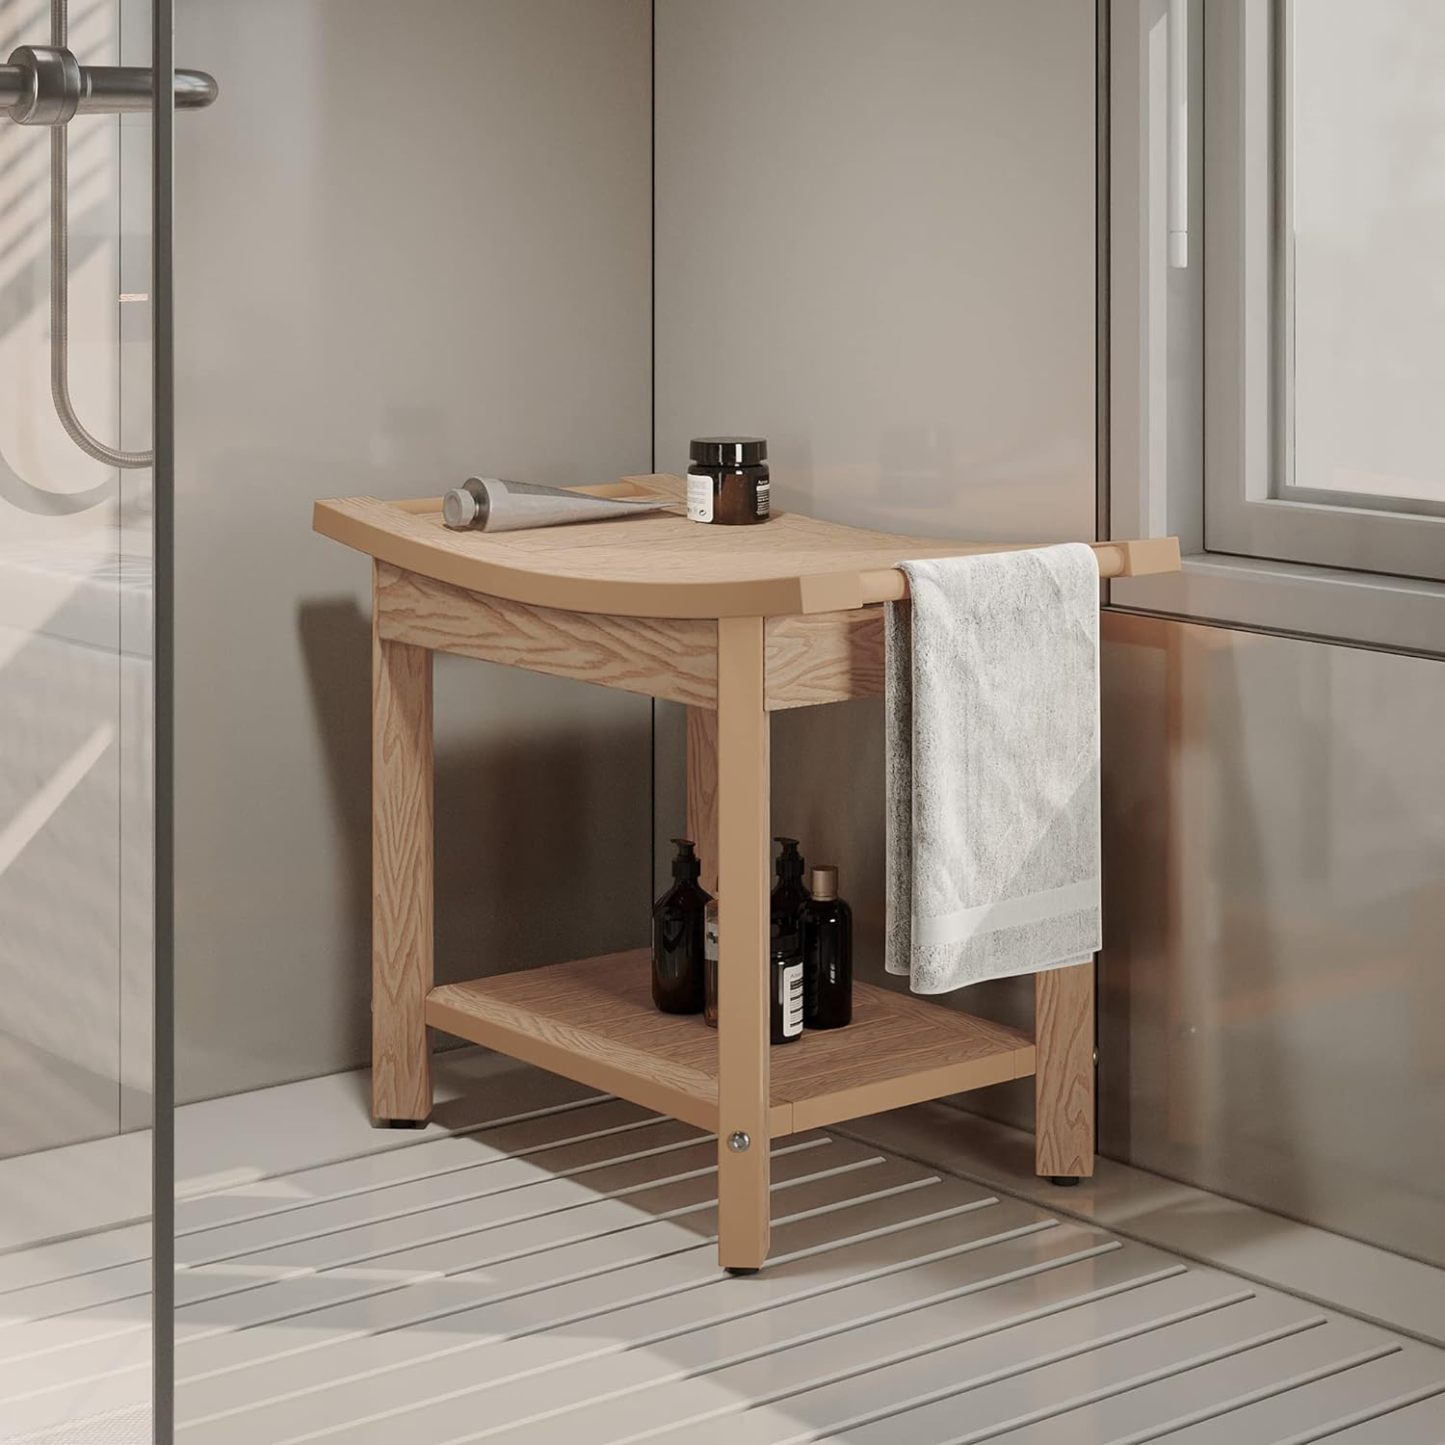 Poly Lumber Shower Bench, Shower Stool with Handles Storage Shelf